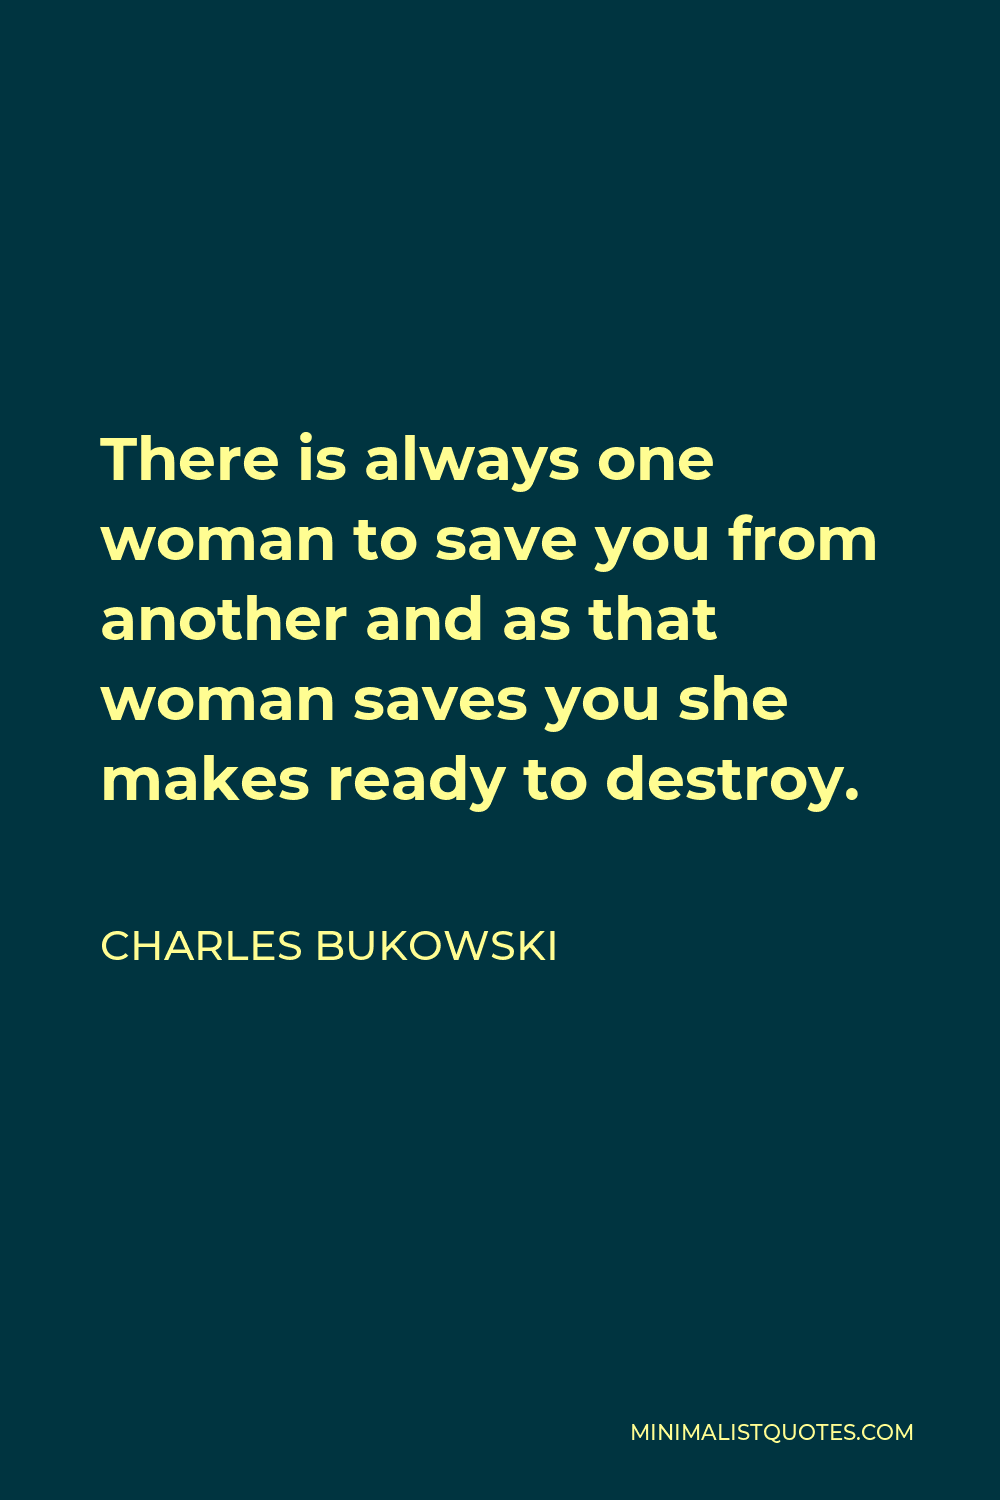 Charles Bukowski Quote - There is always one woman to save you from another and as that woman saves you she makes ready to destroy.